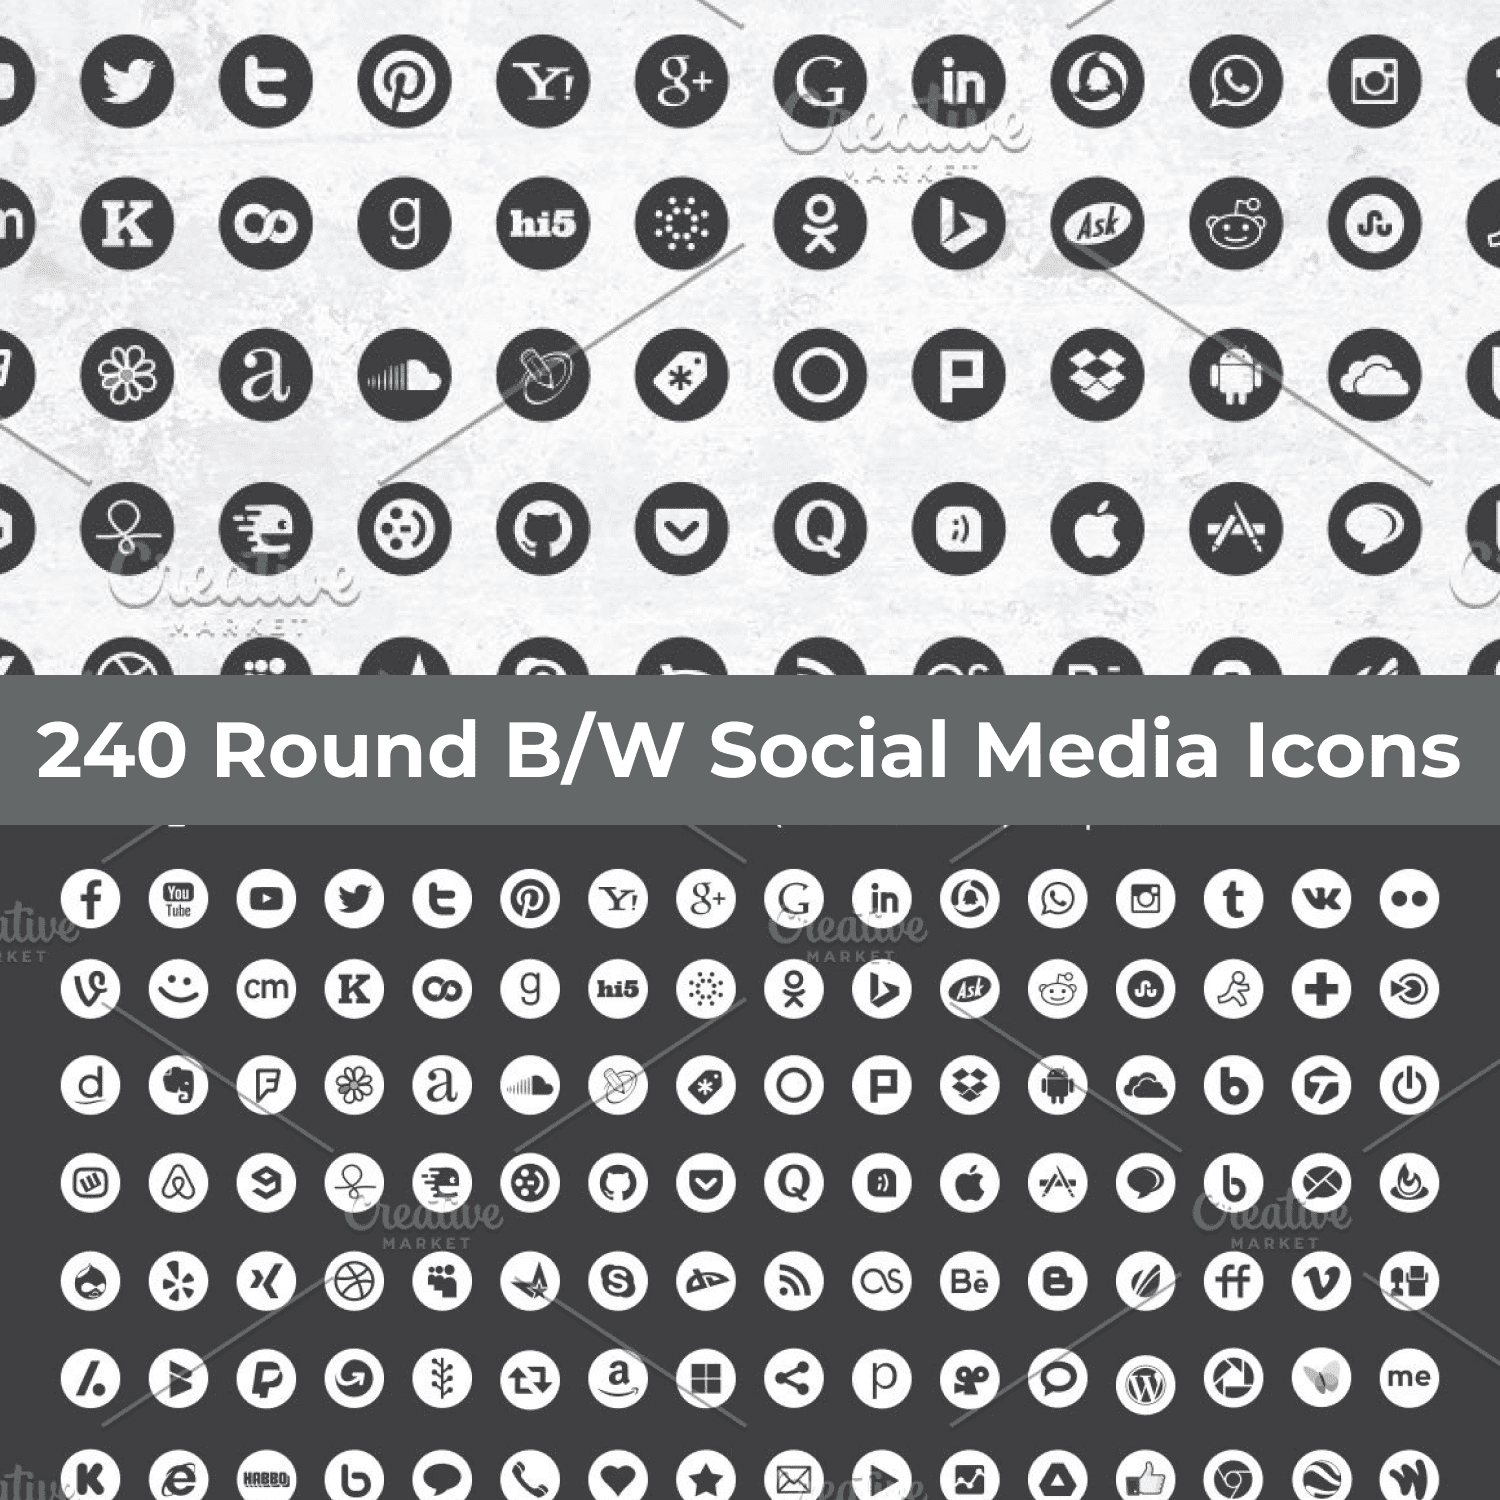 240 Round B/W Social Media Icons cover image.